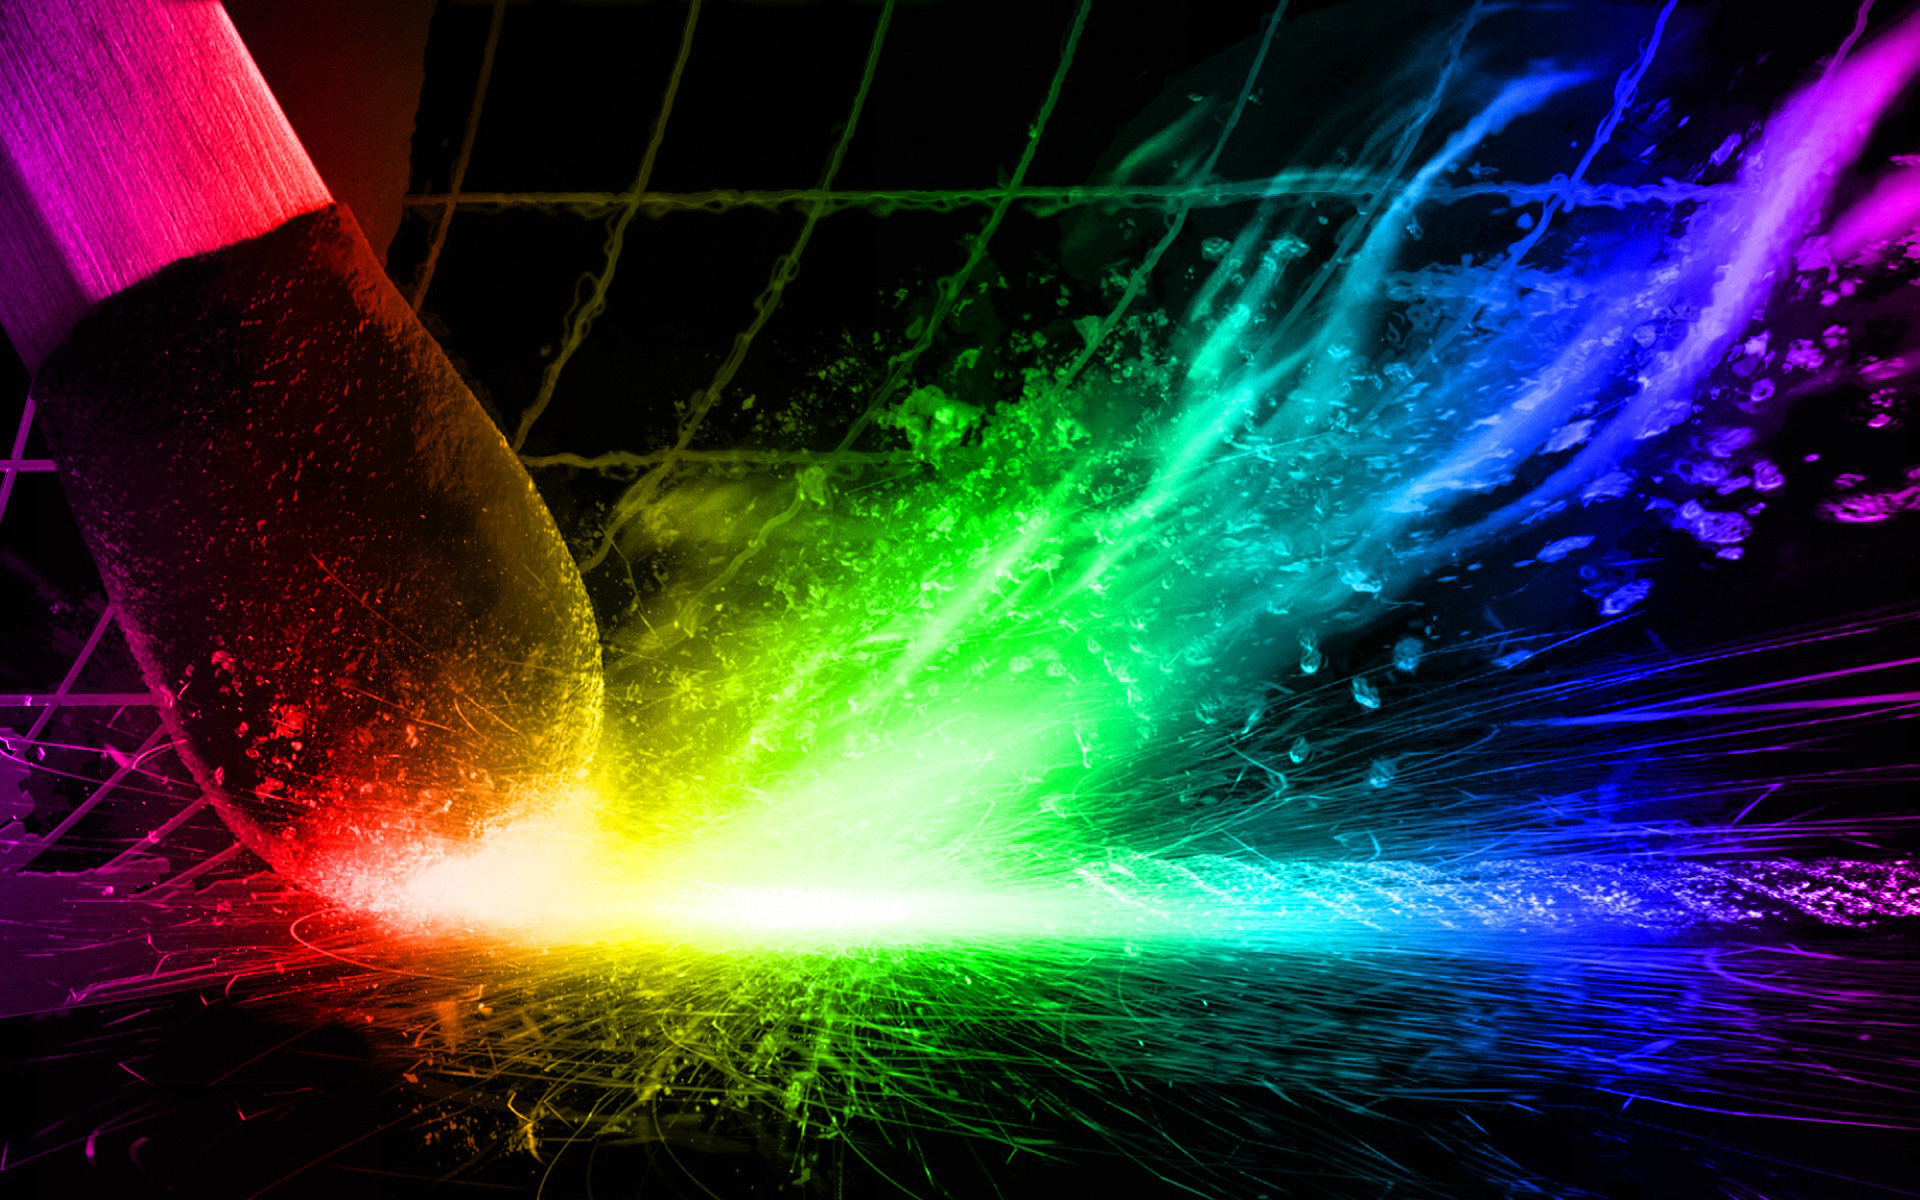 Colorful 3d Wallpapers - Art Background Design Hd - HD Wallpaper 